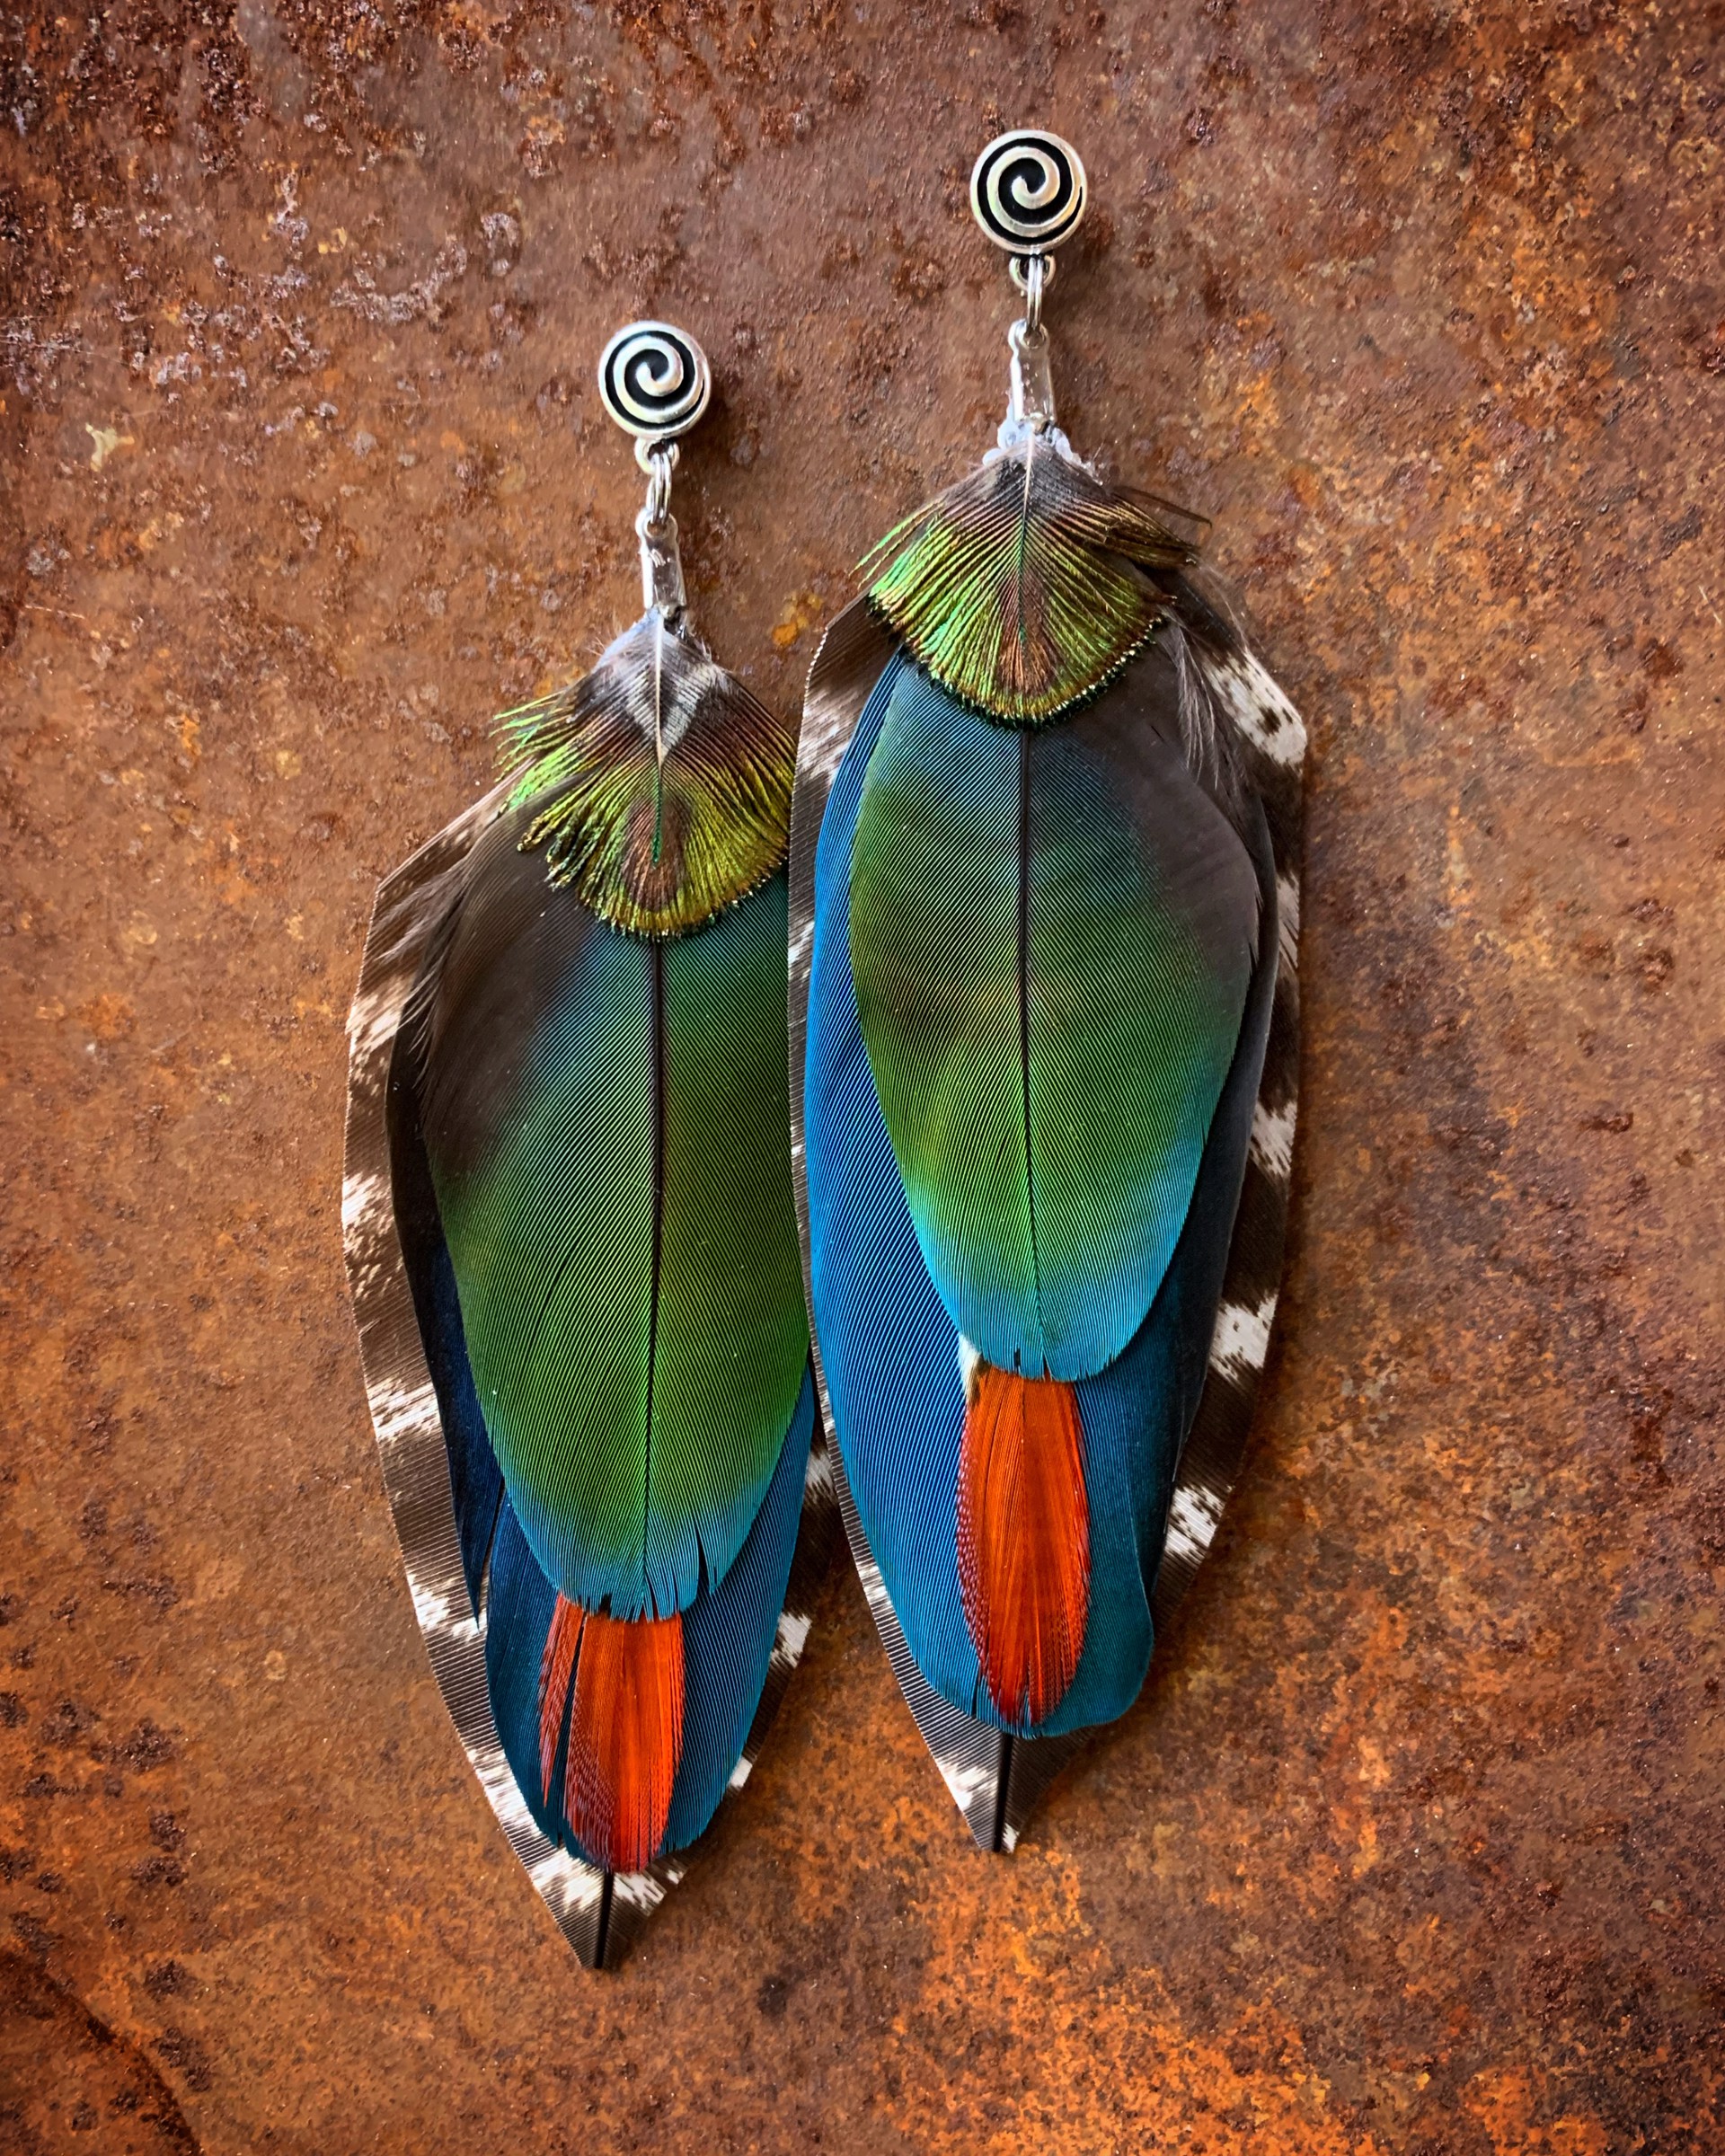 K518 Large Parrot Earrings by Kelly Ormsby